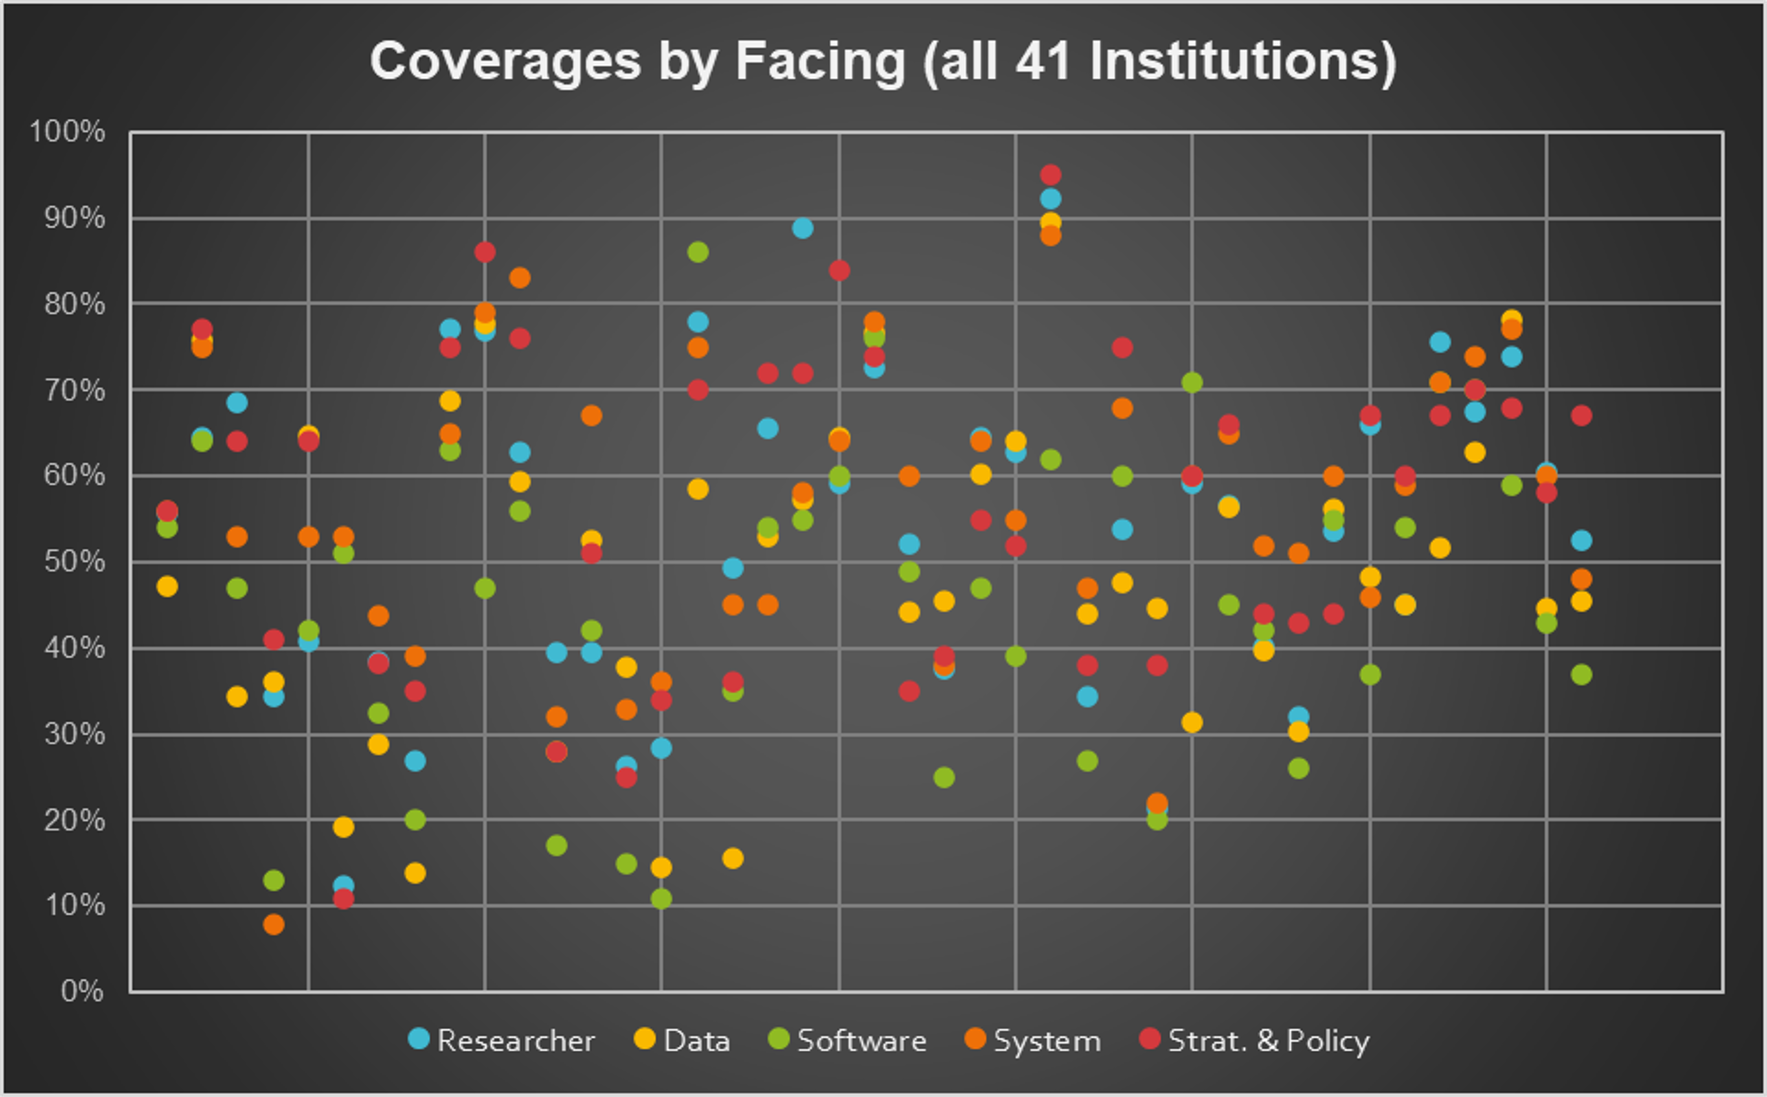 Scatter Plot showing the capabilities coverage for all 41 institutions